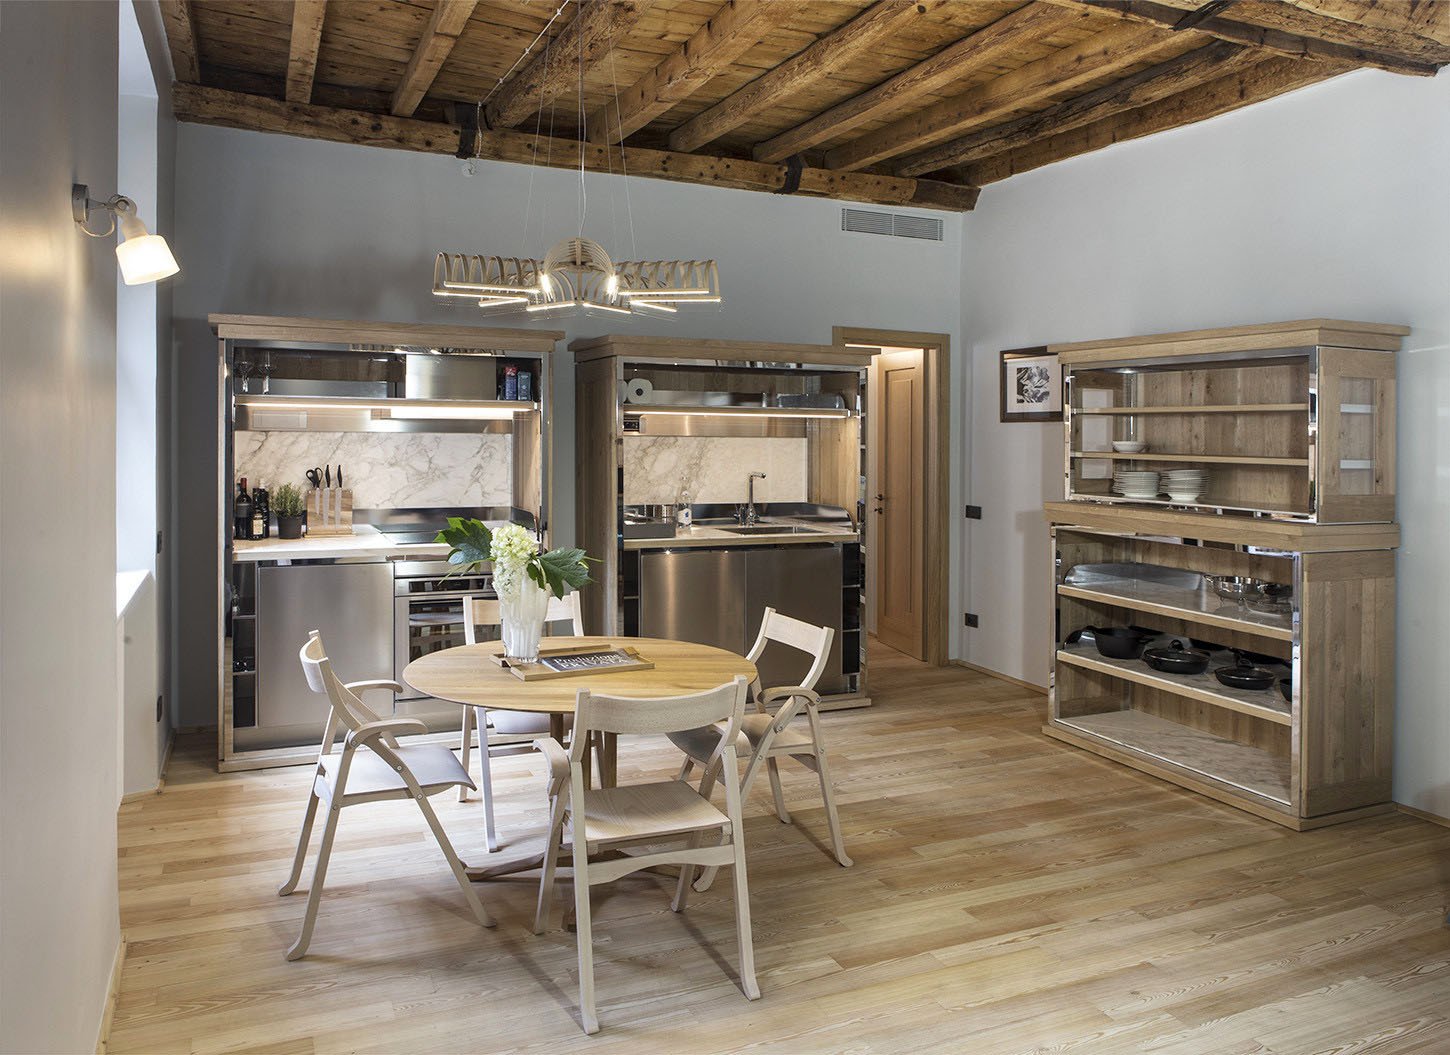 Kitchen with Wood Ceiling and Wood Flooring